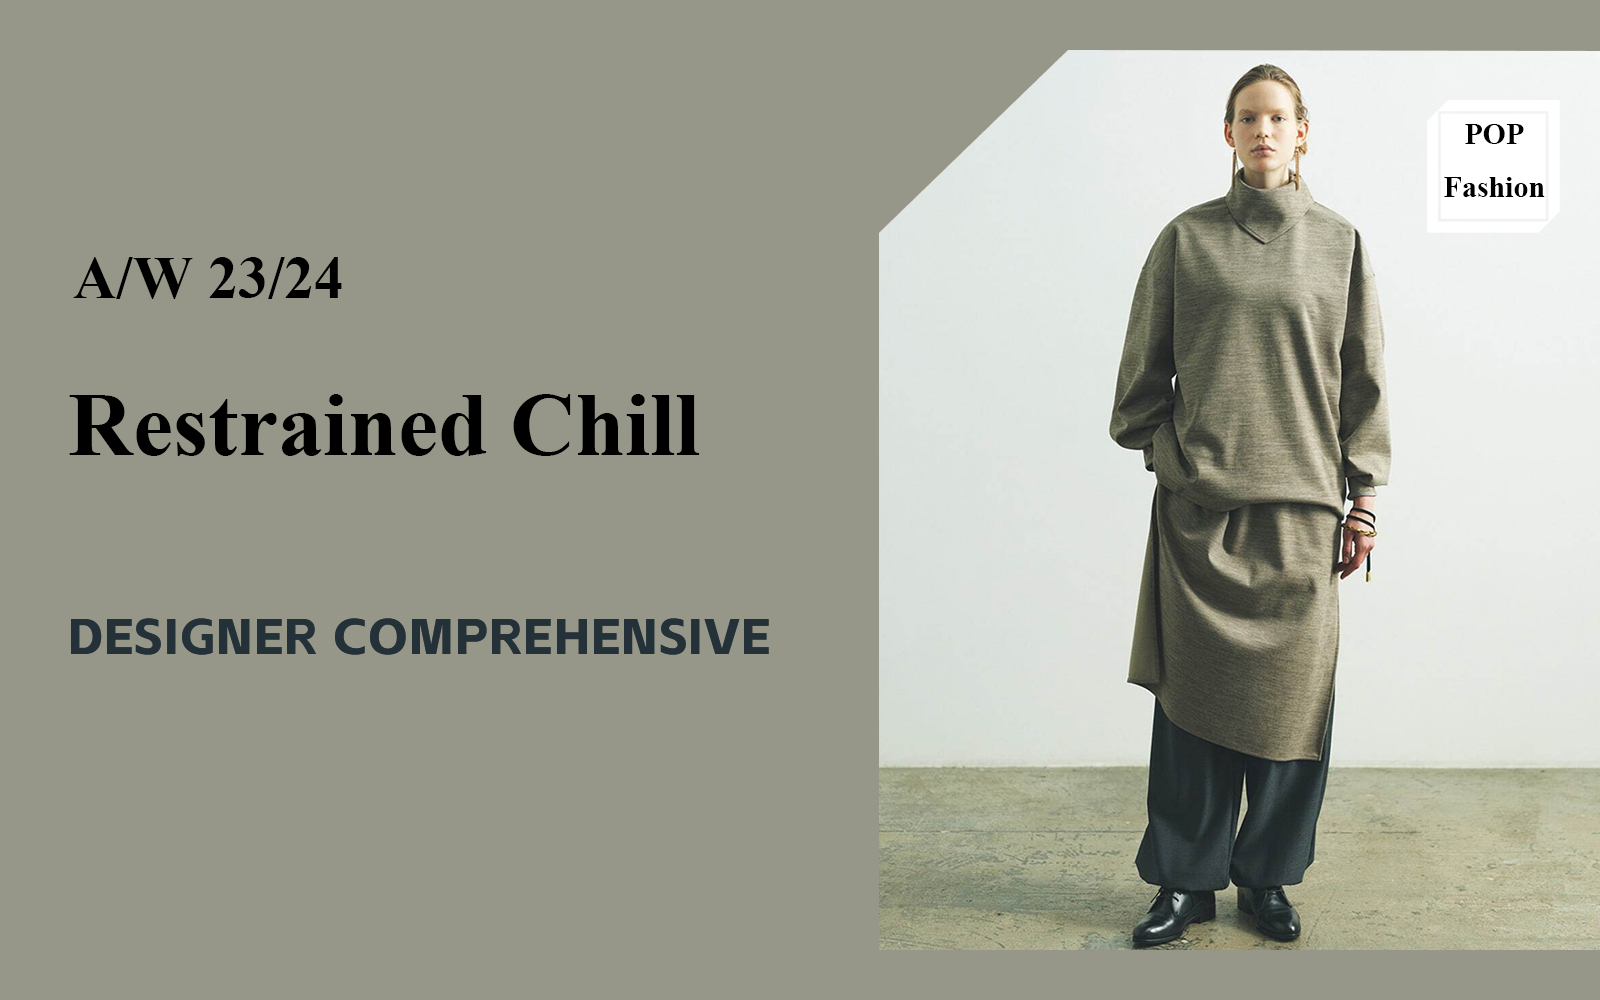 Restrained Chill -- The Comprehensive Analysis of Womenswear Designer Brand